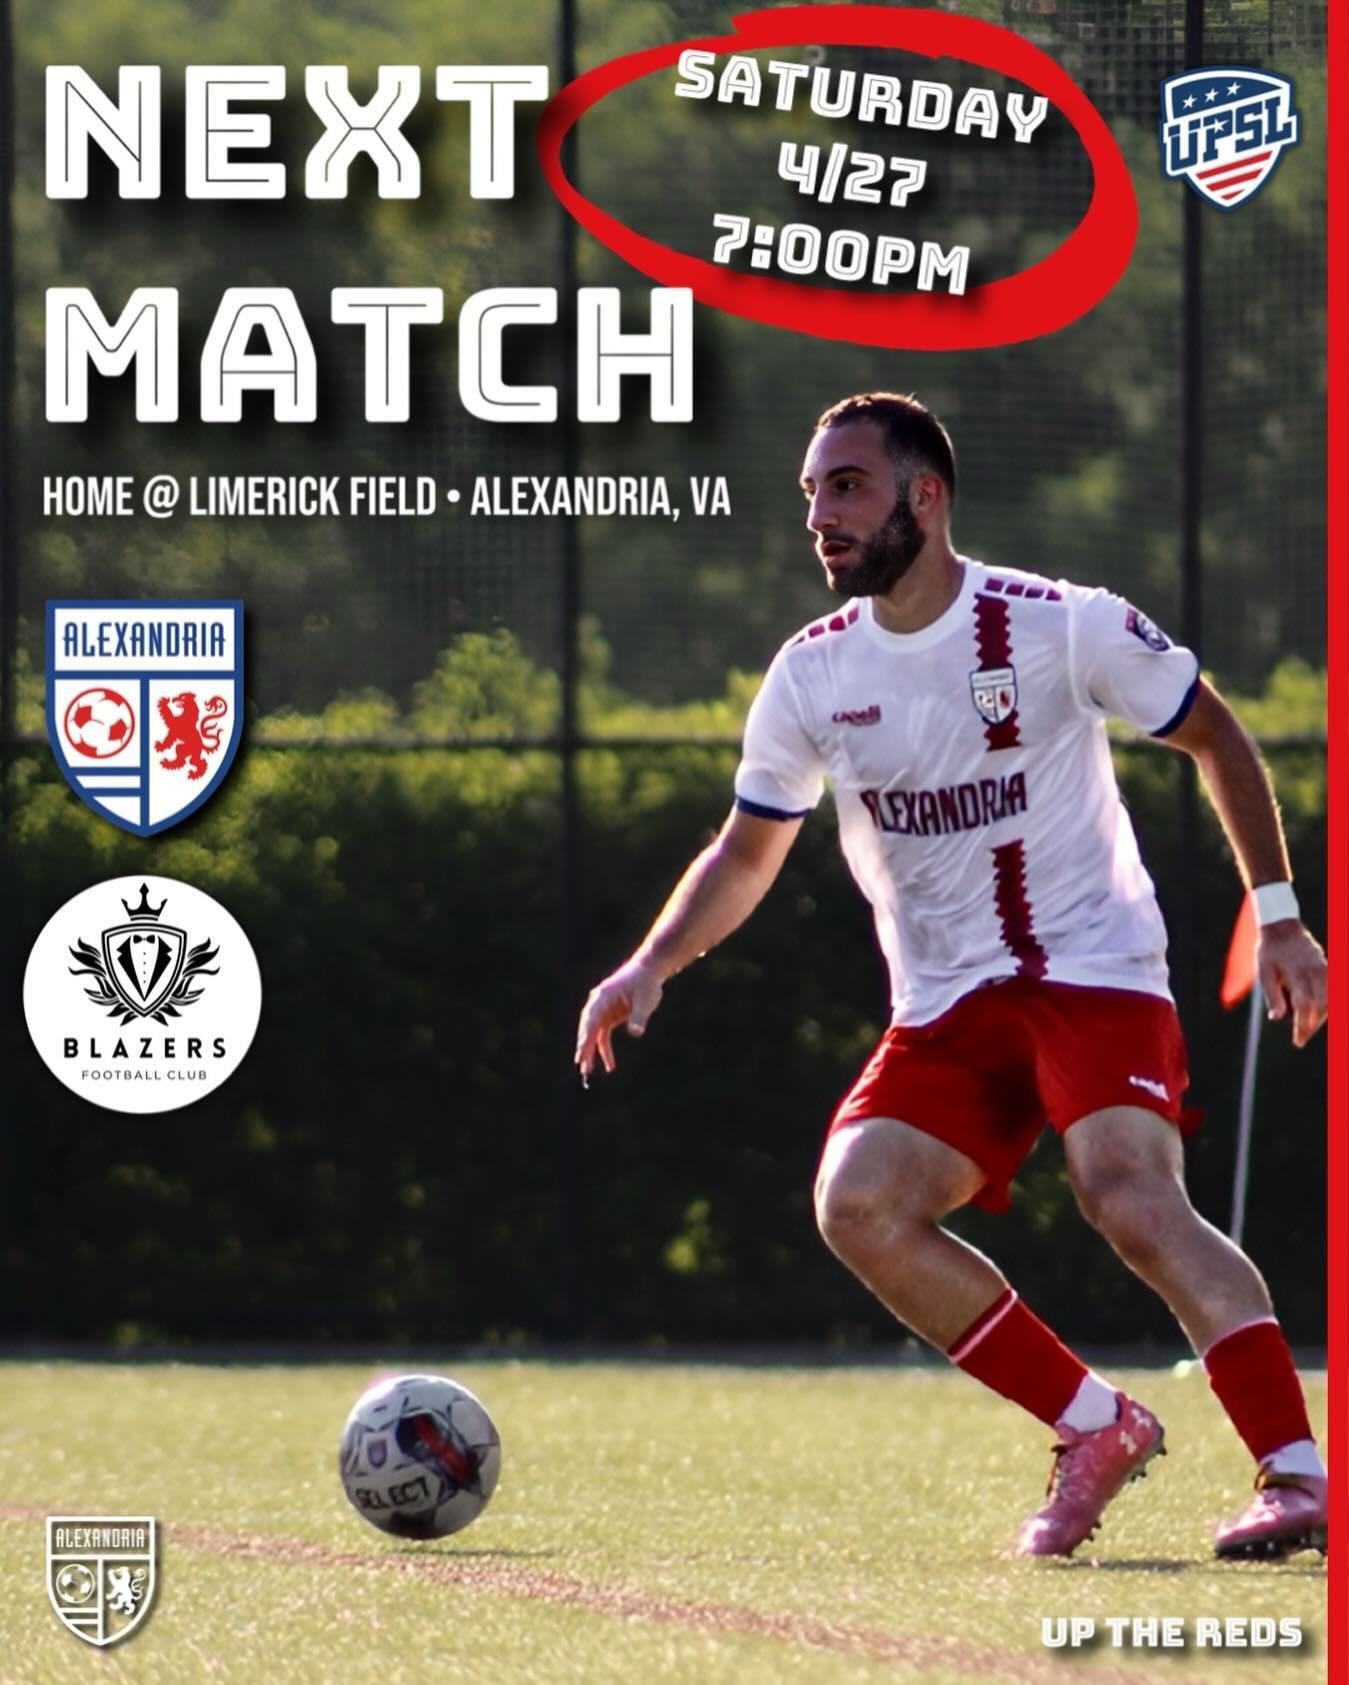 Saturday night we play host to local UPSL newcomers, Blazers FC. After a bye week your Reds are eager to get back on the pitch and fight for full points! We look forward to seeing you there! UP THE REDS!! 🔴⚪️